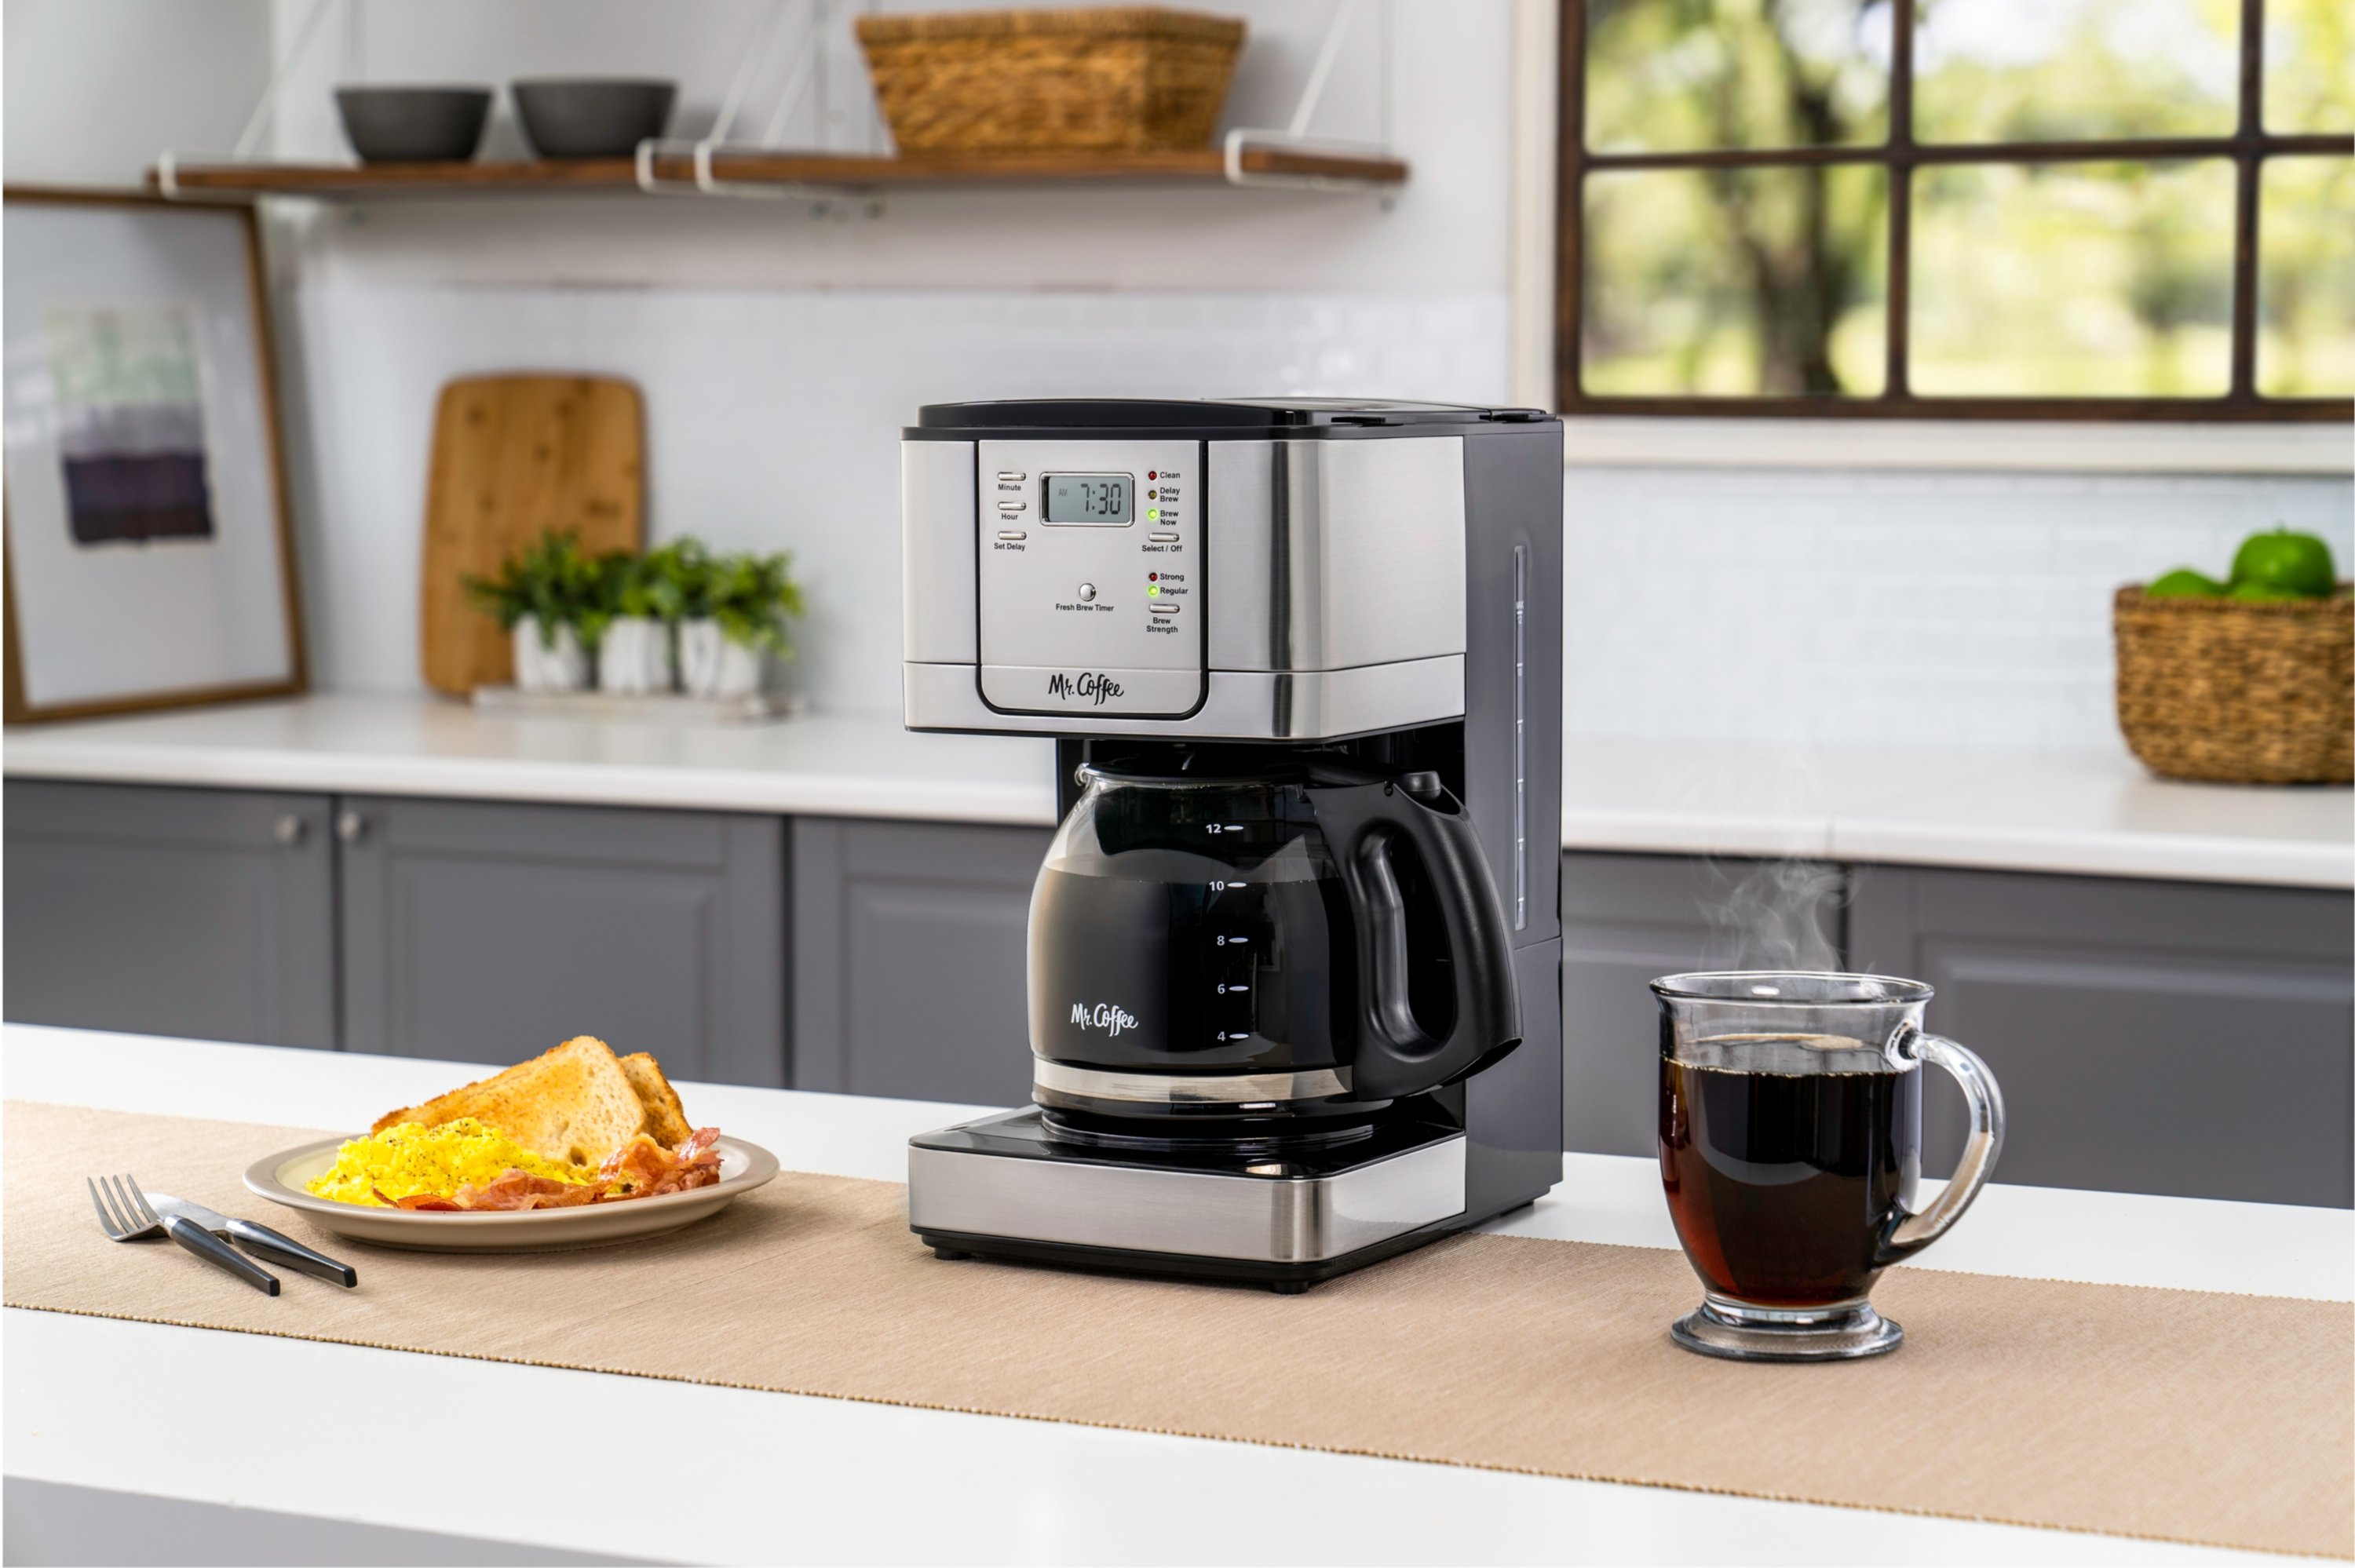 Mr. Coffee - 12-Cup Coffee Maker with Strong Brew Selector